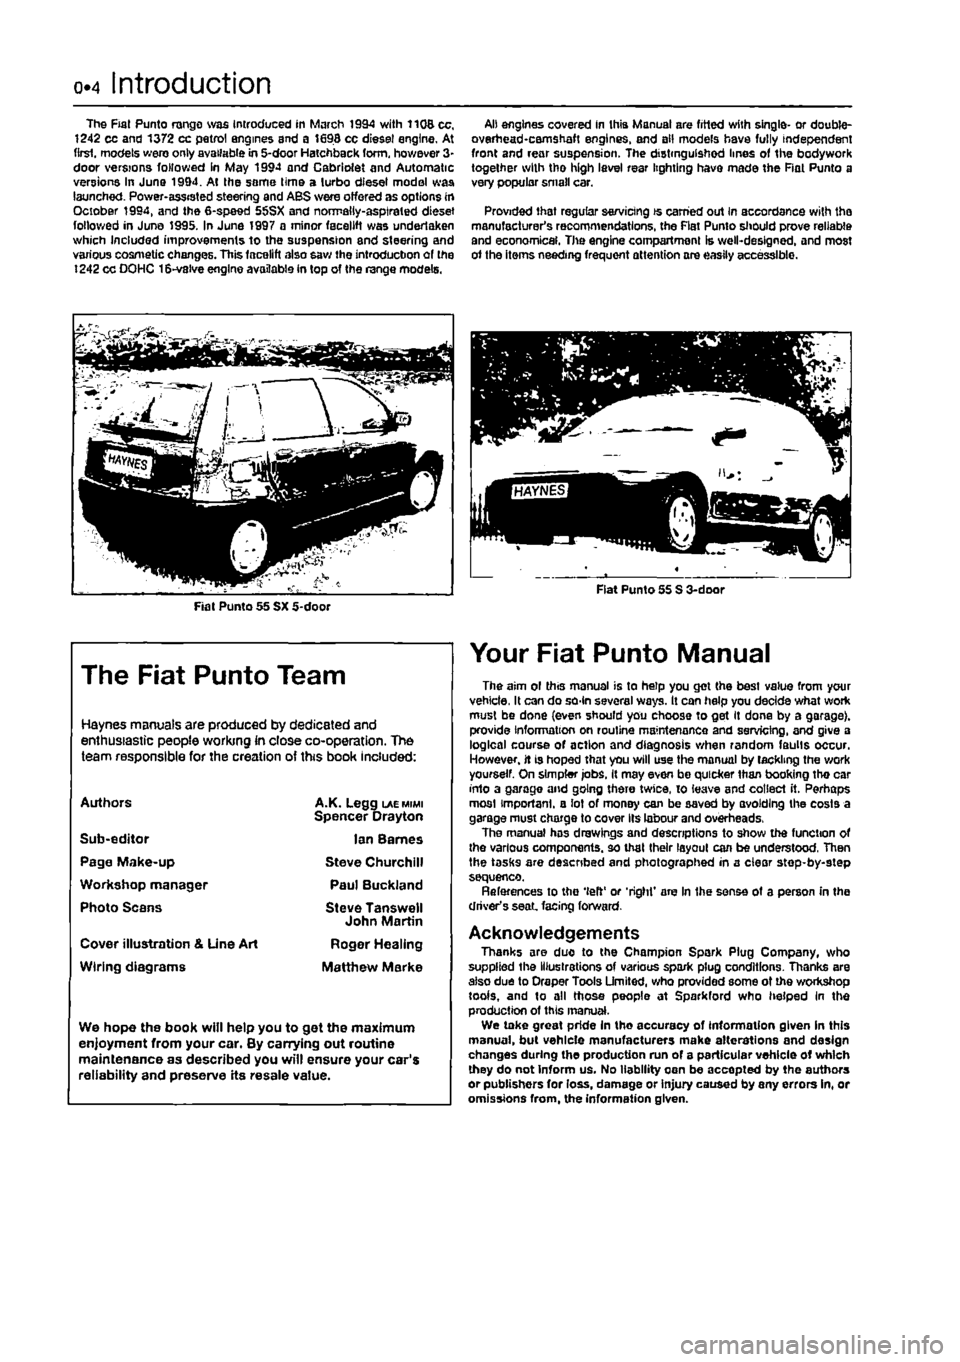 FIAT PUNTO 1996 176 / 1.G Workshop Manual 
0.4 Introduction 
The Fiat Punto range was Introduced in March 1994 with 1106 cc, 1242 cc and 1372 cc petrol engines and a 1698 cc diesel engine. At first, models wero only available in 5-door Hatchb